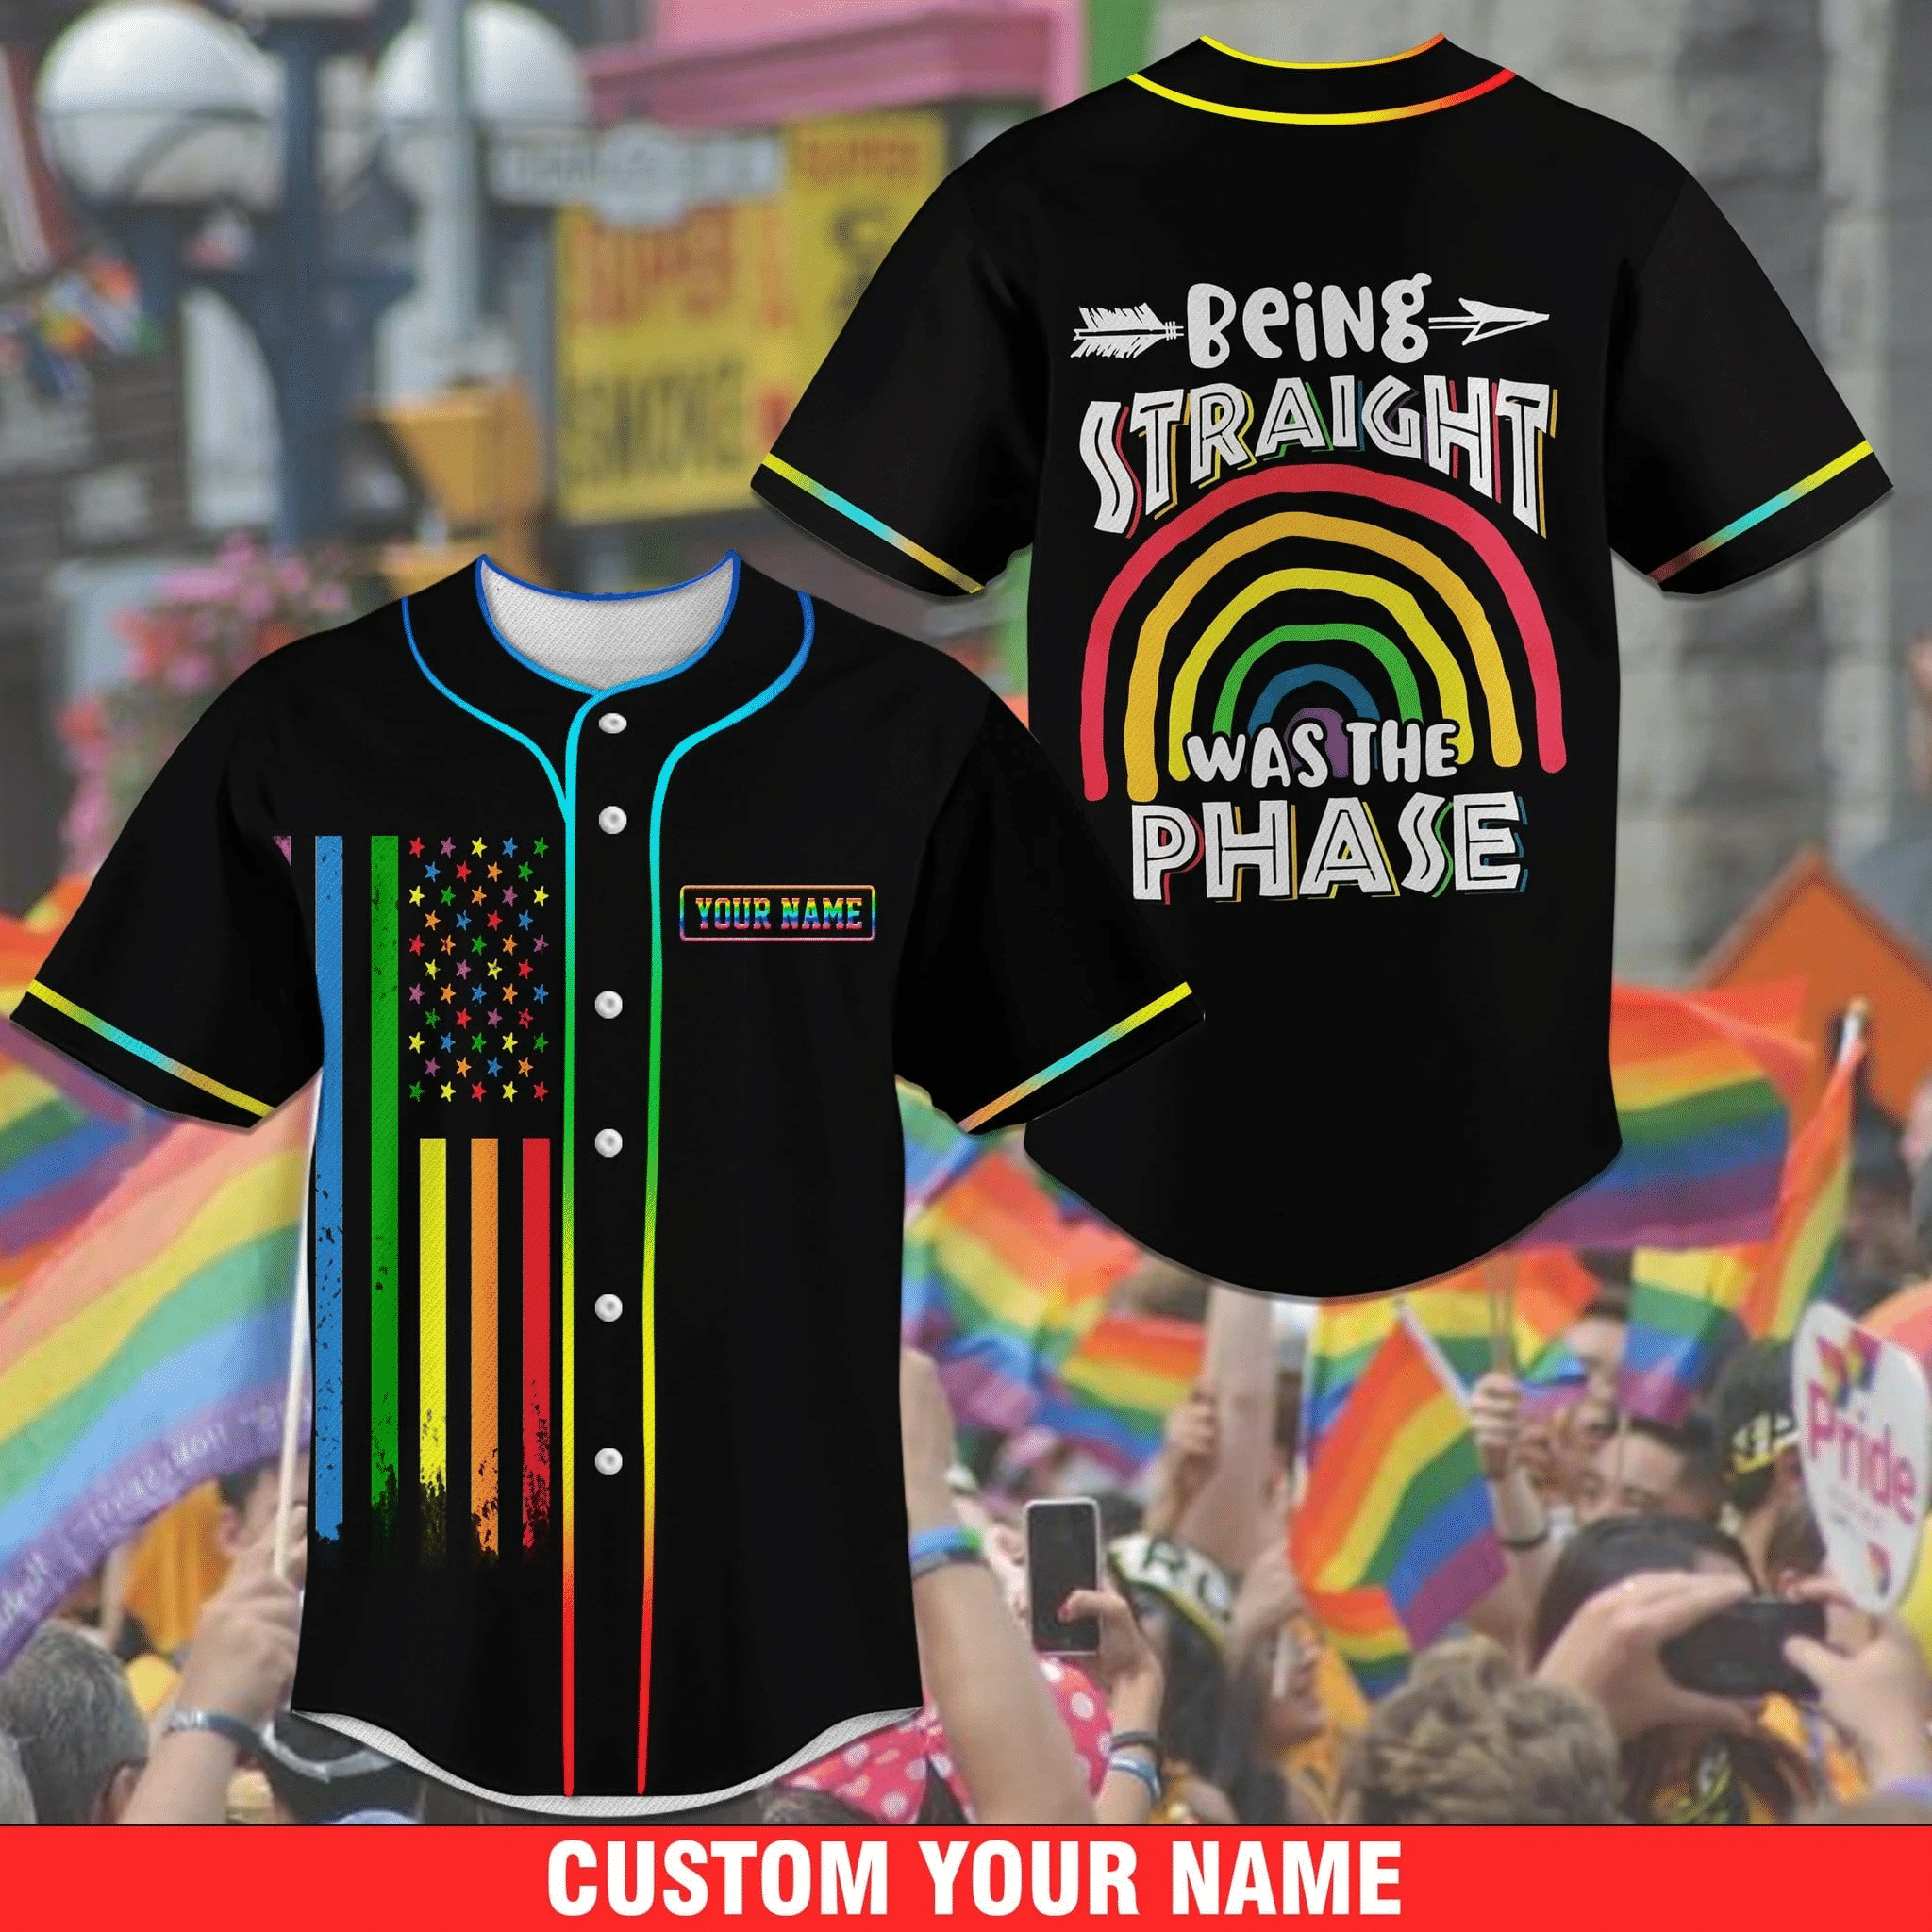 LGBT Being Straight Was A Phase Personalized Baseball Jersey, Unisex Jersey Shirt for Men Women